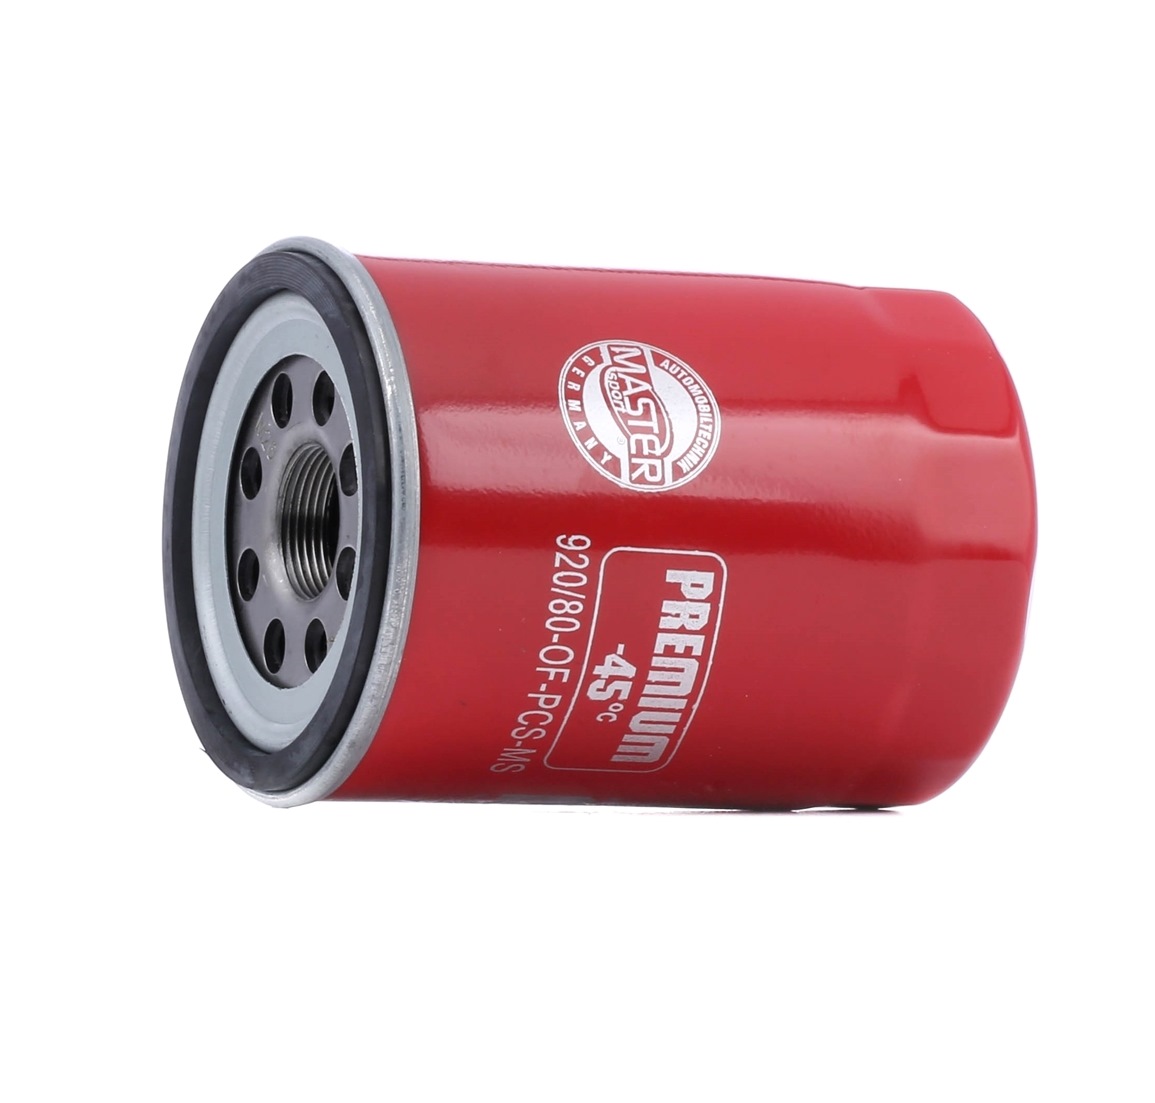 MASTER-SPORT 920/80-OF-PCS-MS Oil filter M 26 X 1.5, with one anti-return valve, Filter Insert